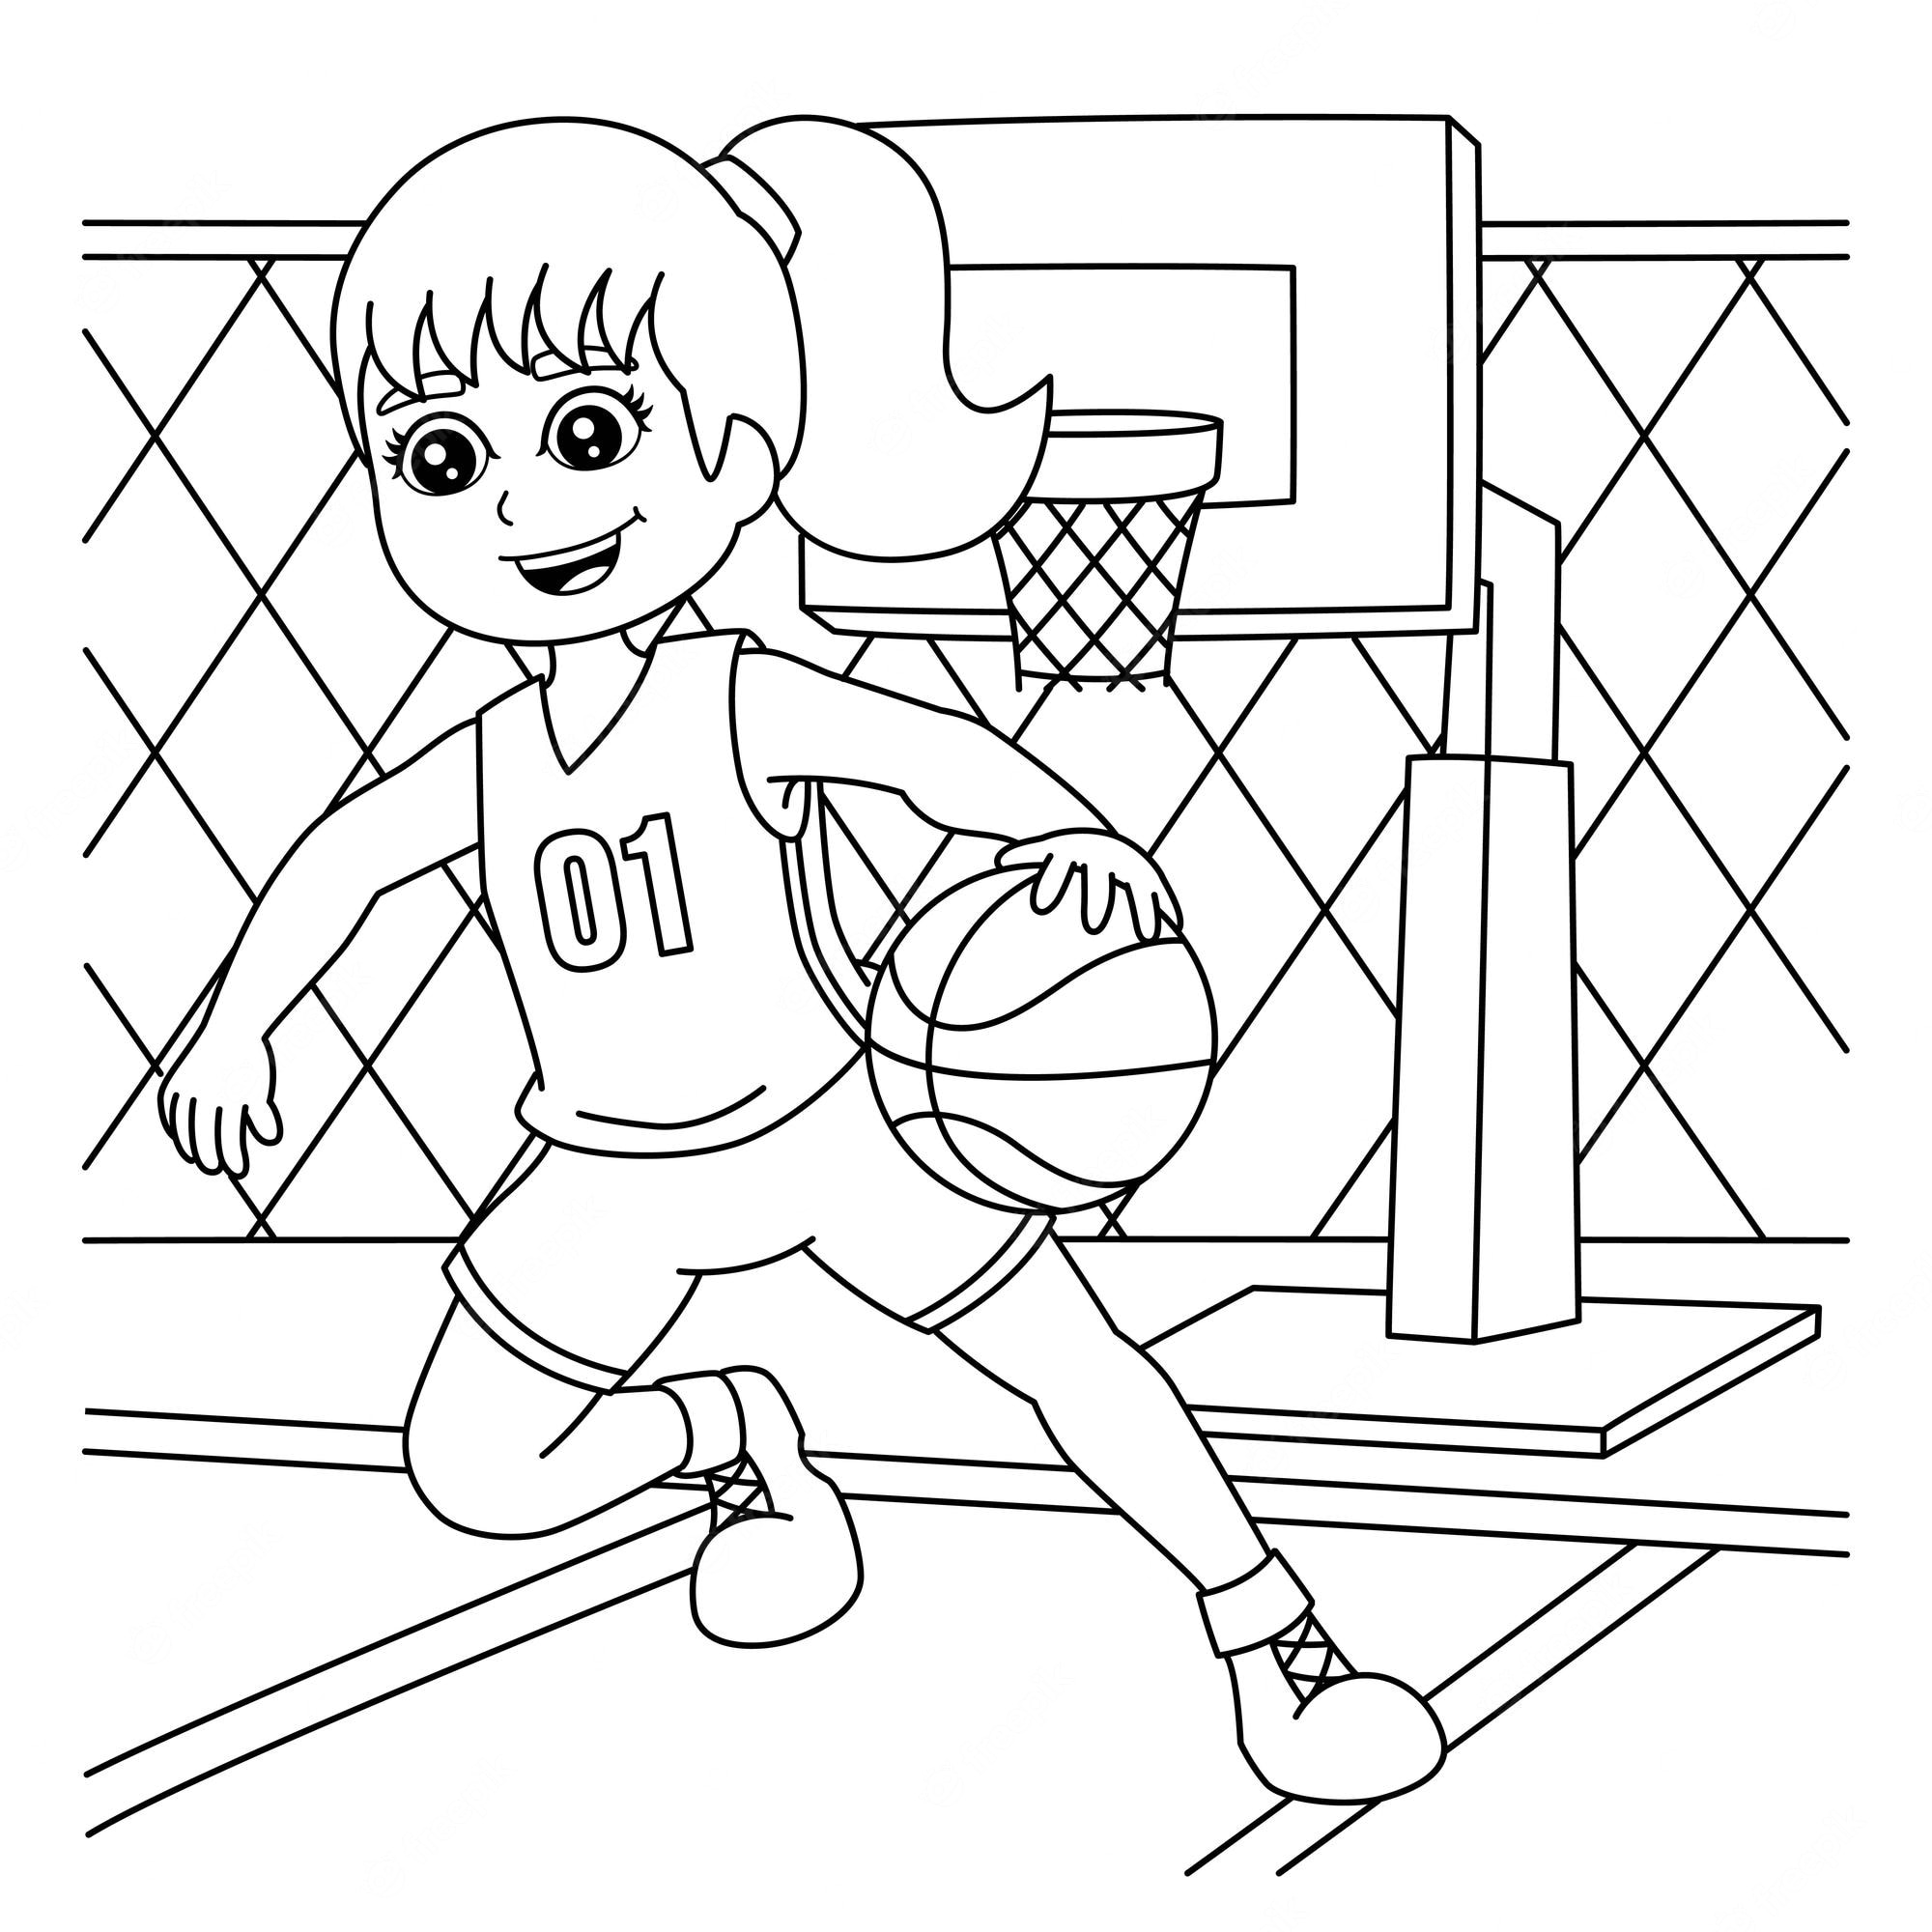 Premium Vector | Girl playing basketball coloring page for kids